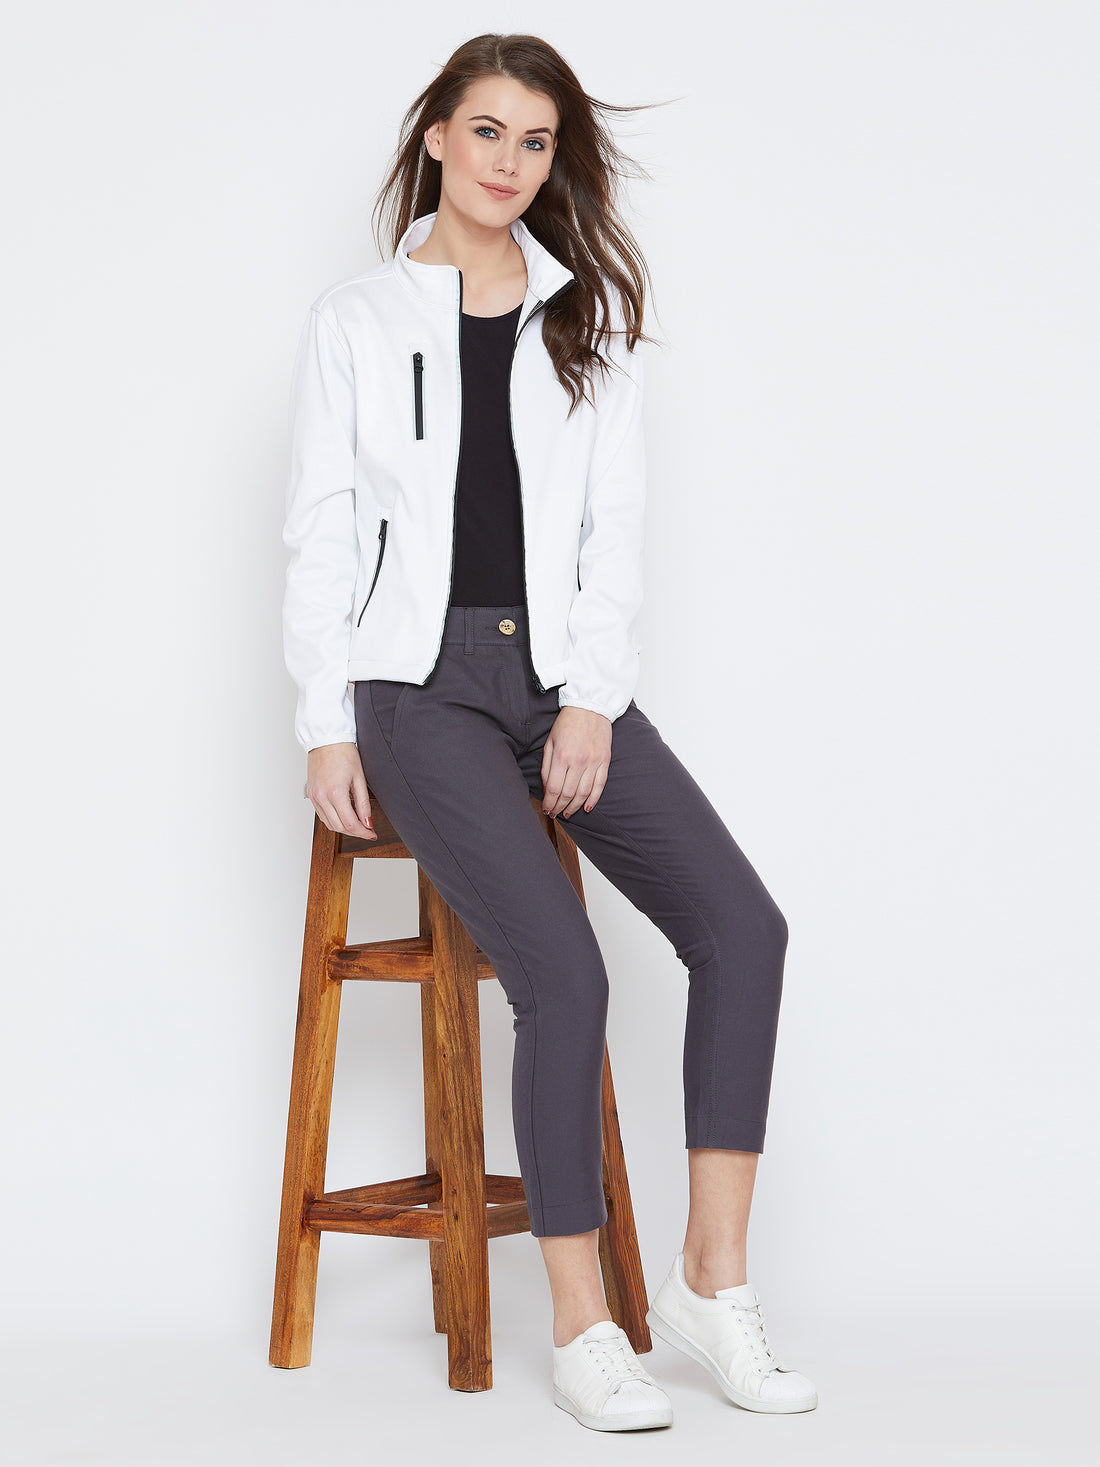 Women White Solid Sporty Jacket - JUMP USA